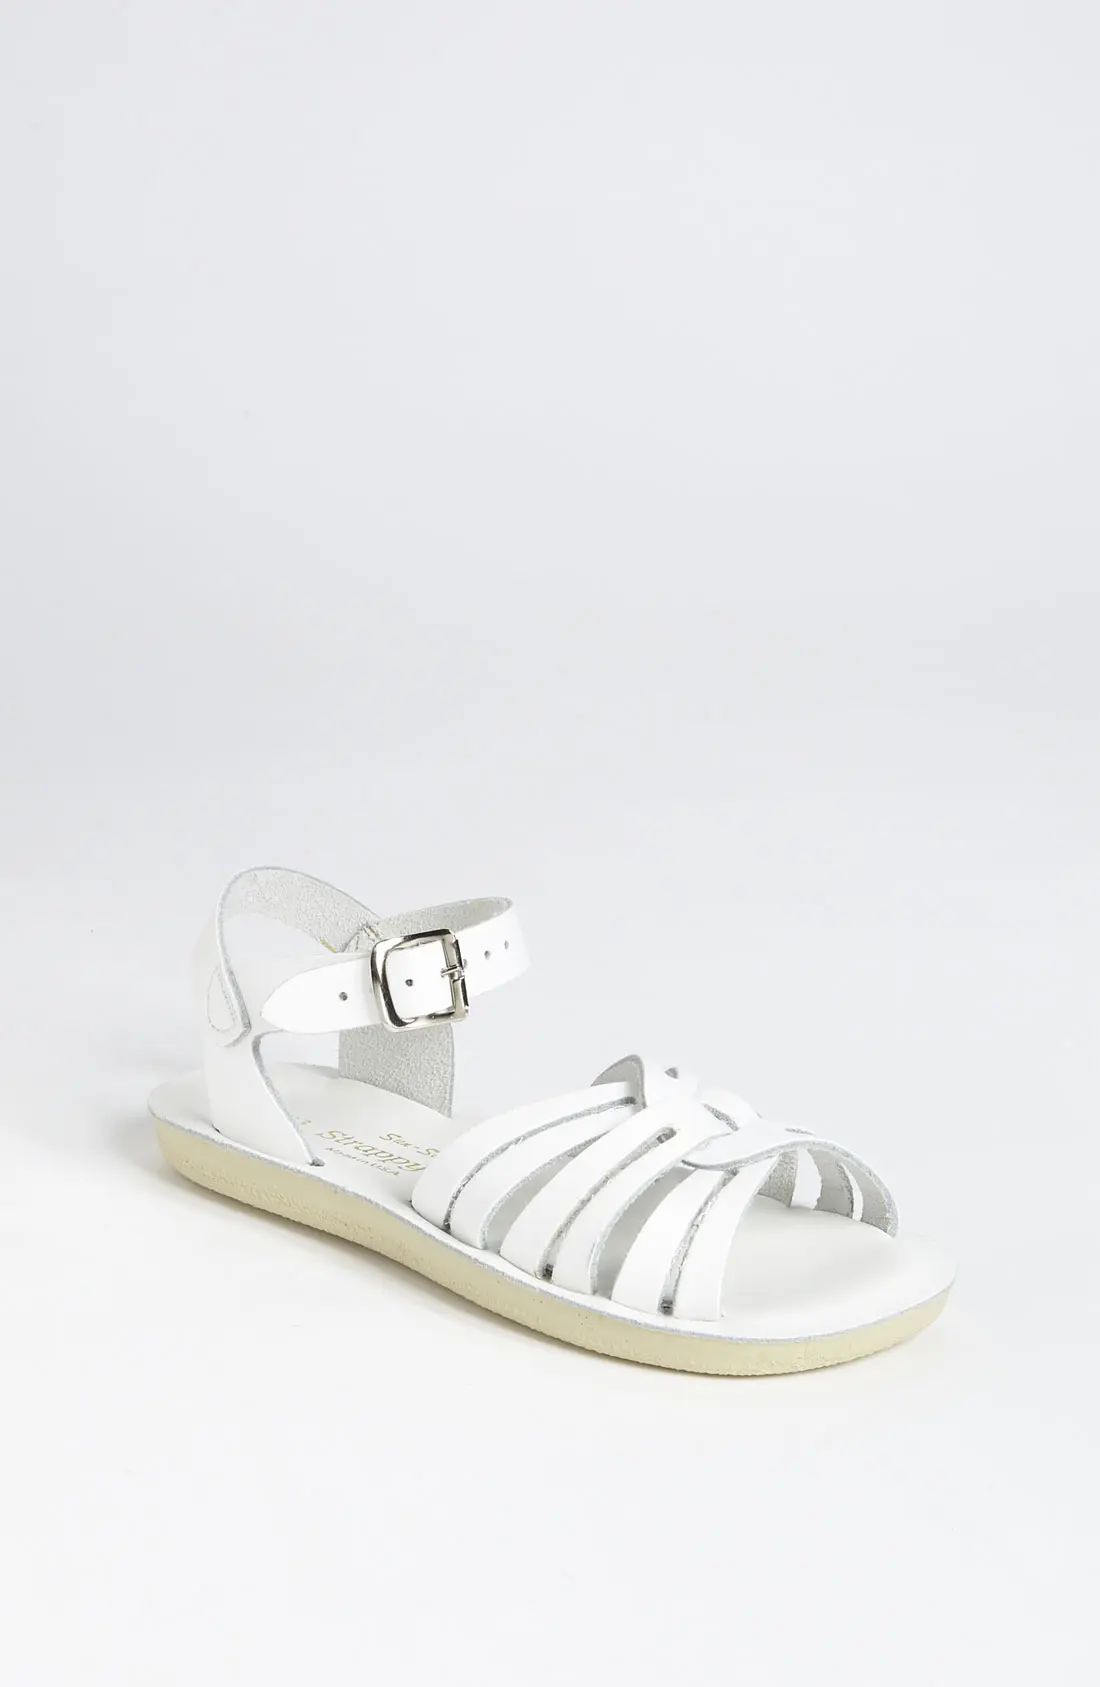 Toddler Girl's Salt Water Sandals By Hoy Strappy Sandal, Size 11 M - White | Nordstrom